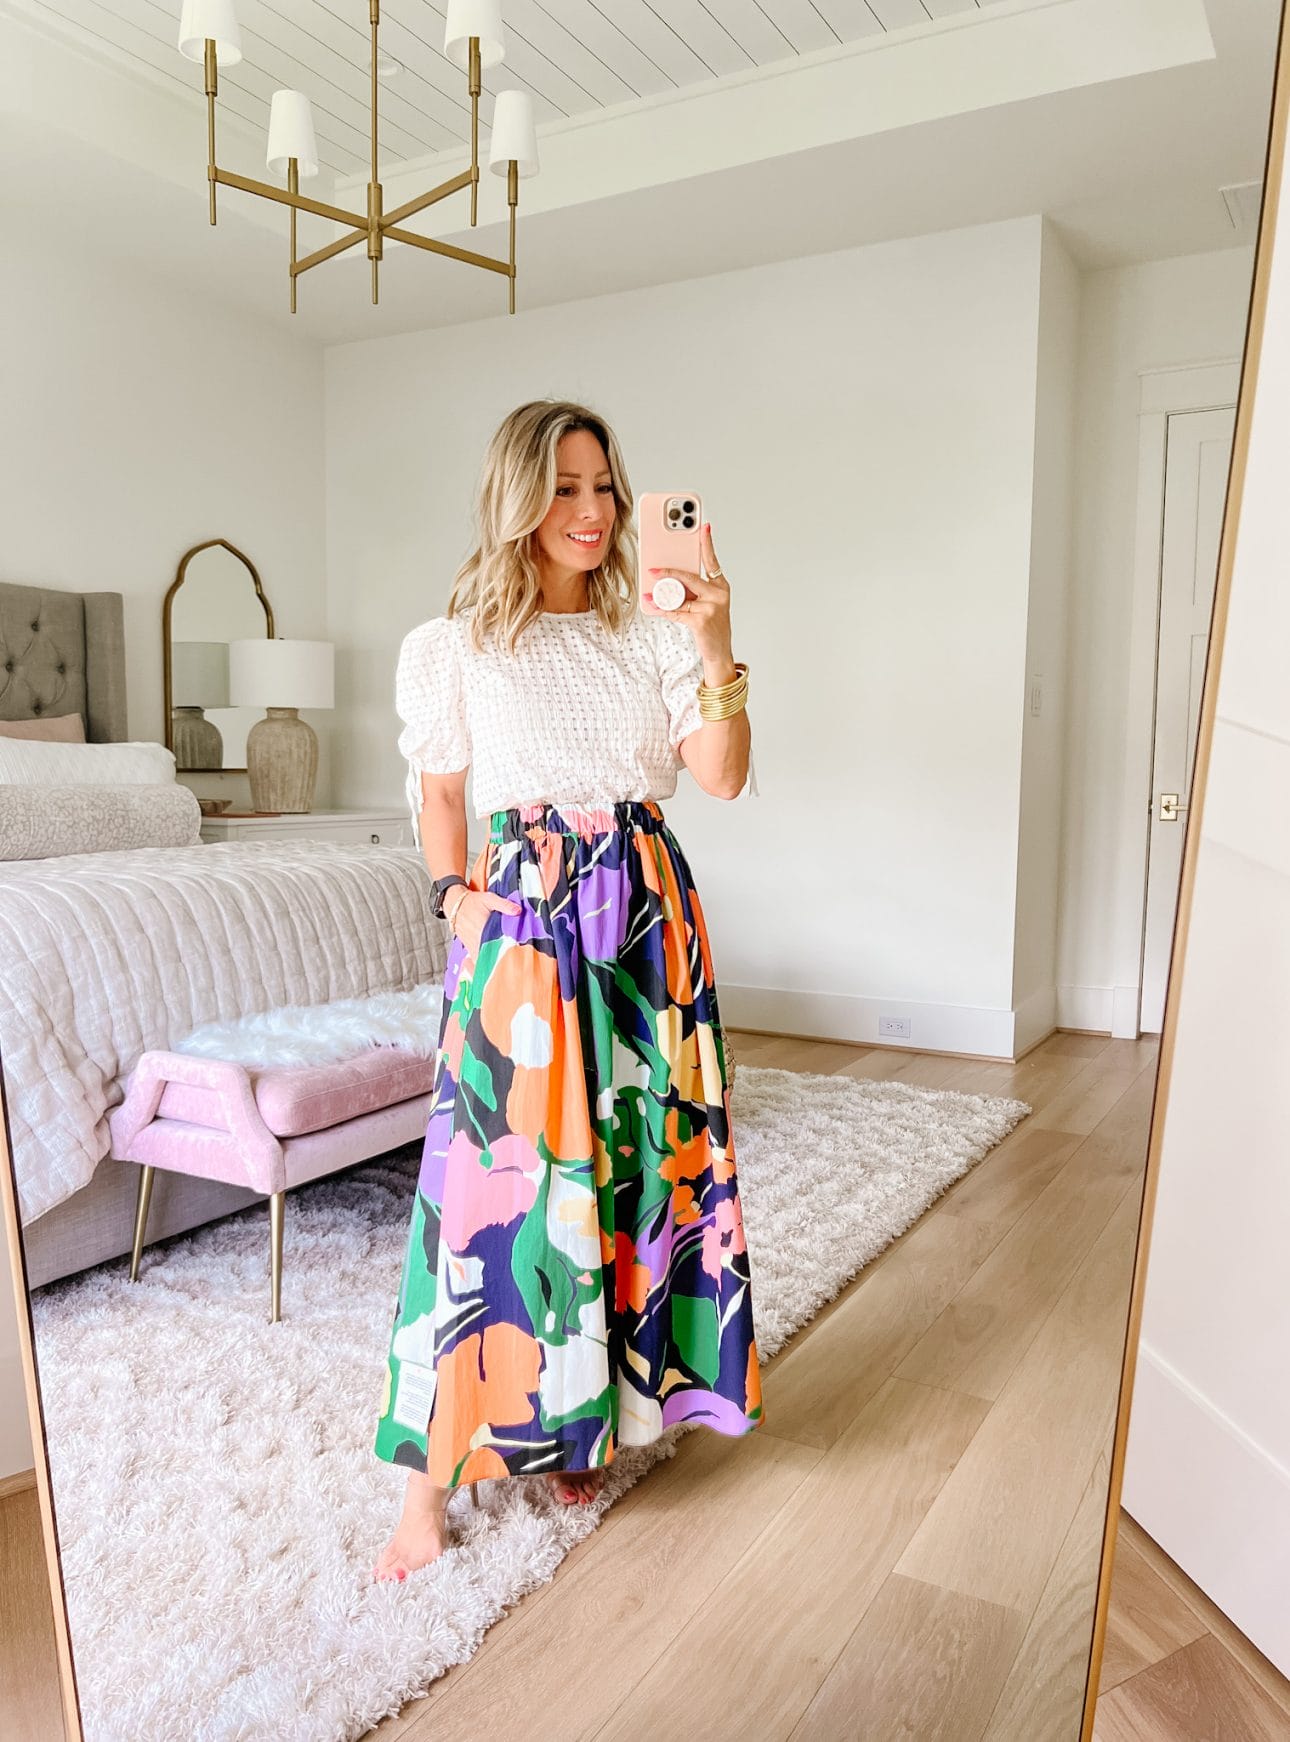 White Puff Sleeve Top, Floral Maxi Skirt, Clear Heels. 